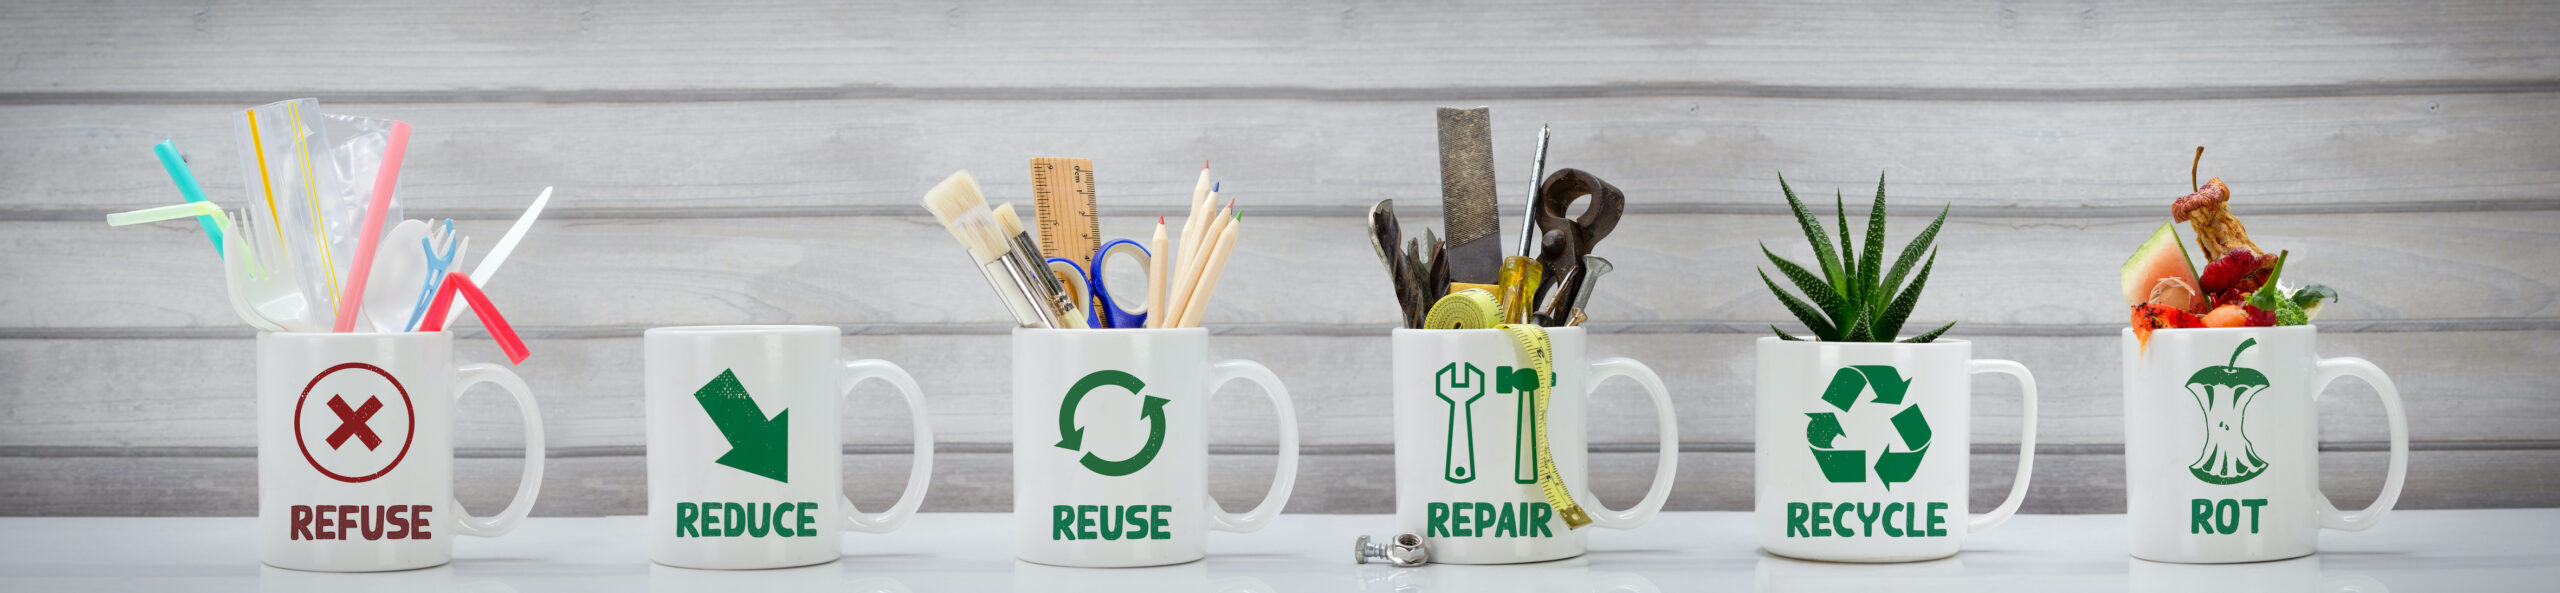 The 6Rs of sustainability: refuse, reduce, reuse, repair, recycle, rot